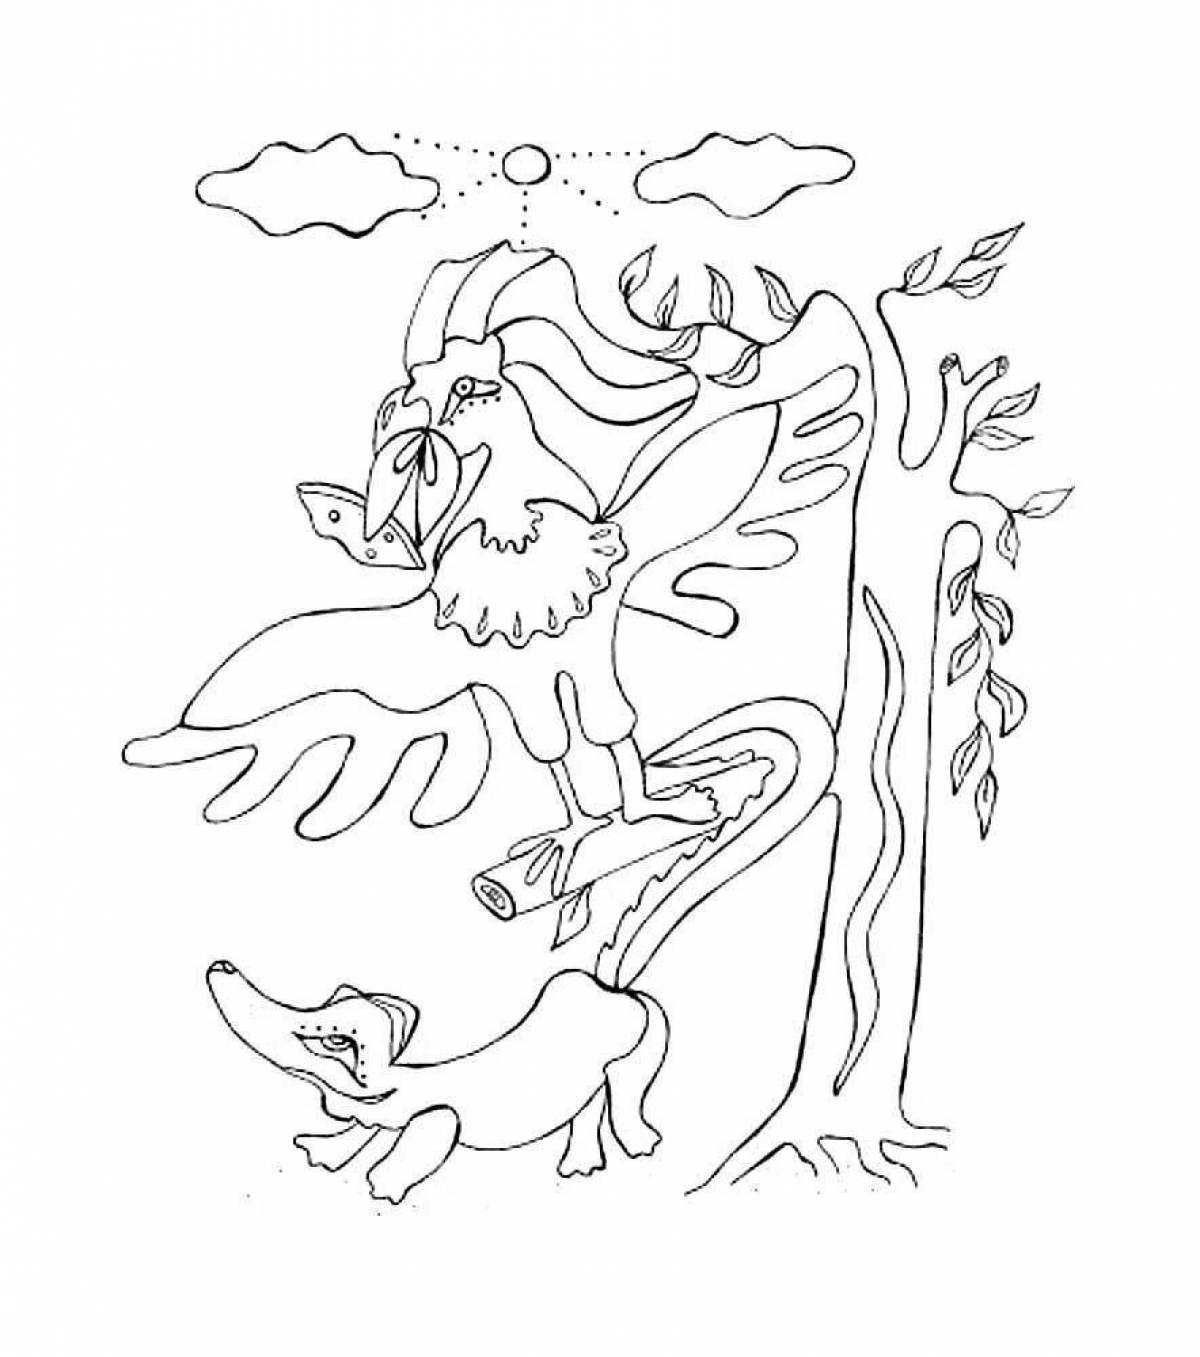 Ether crow and fox coloring page